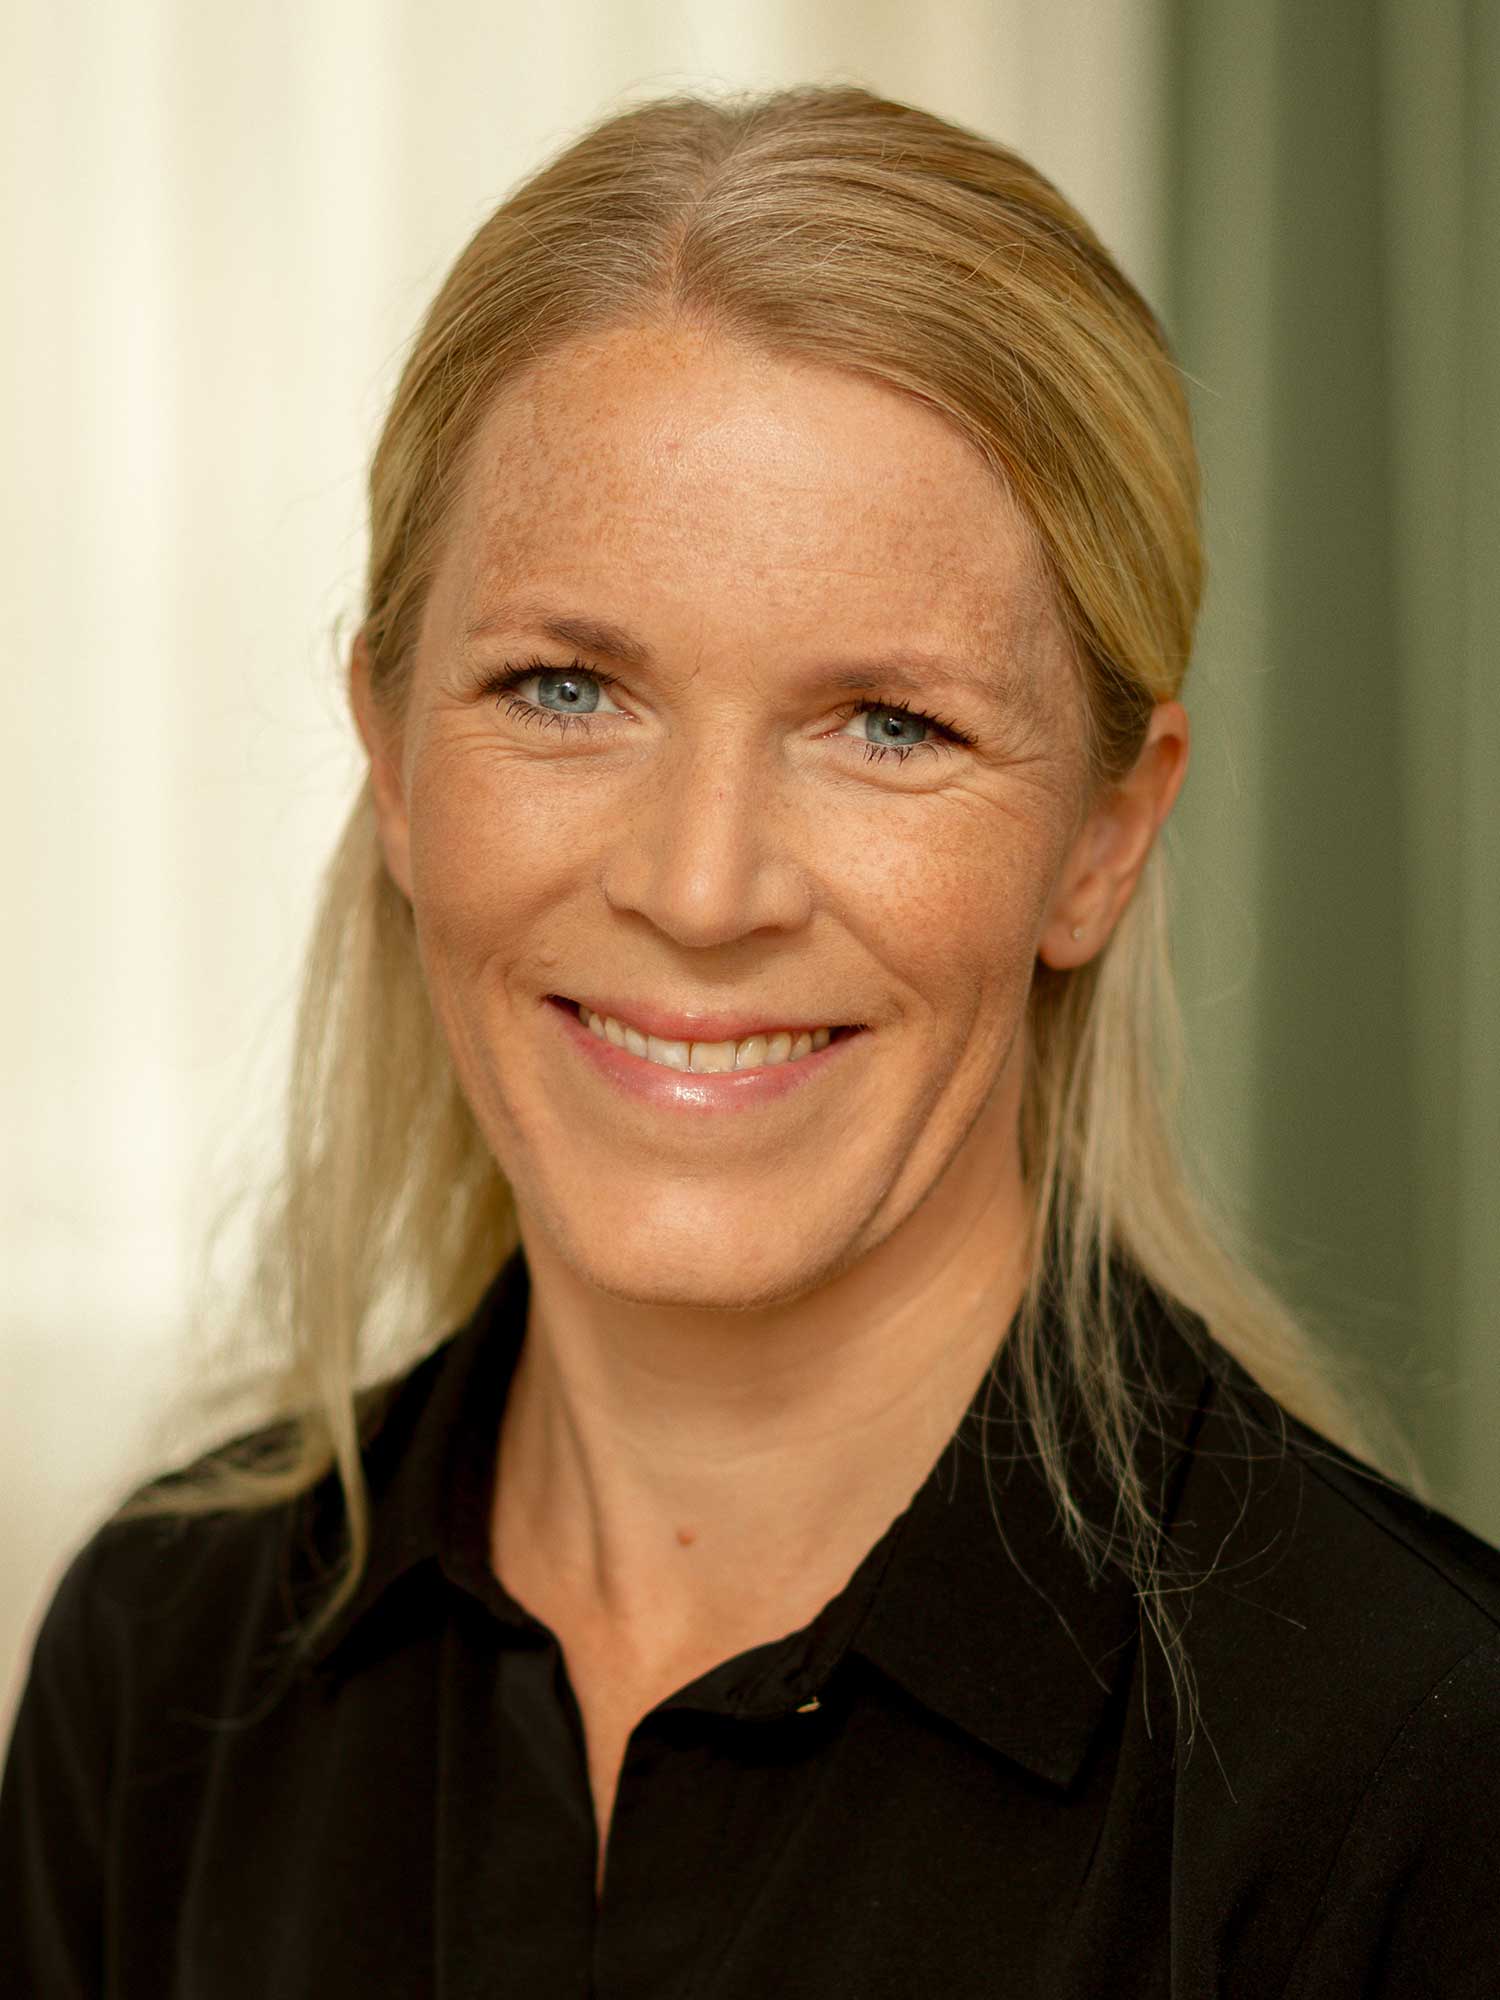 Lina Andersson